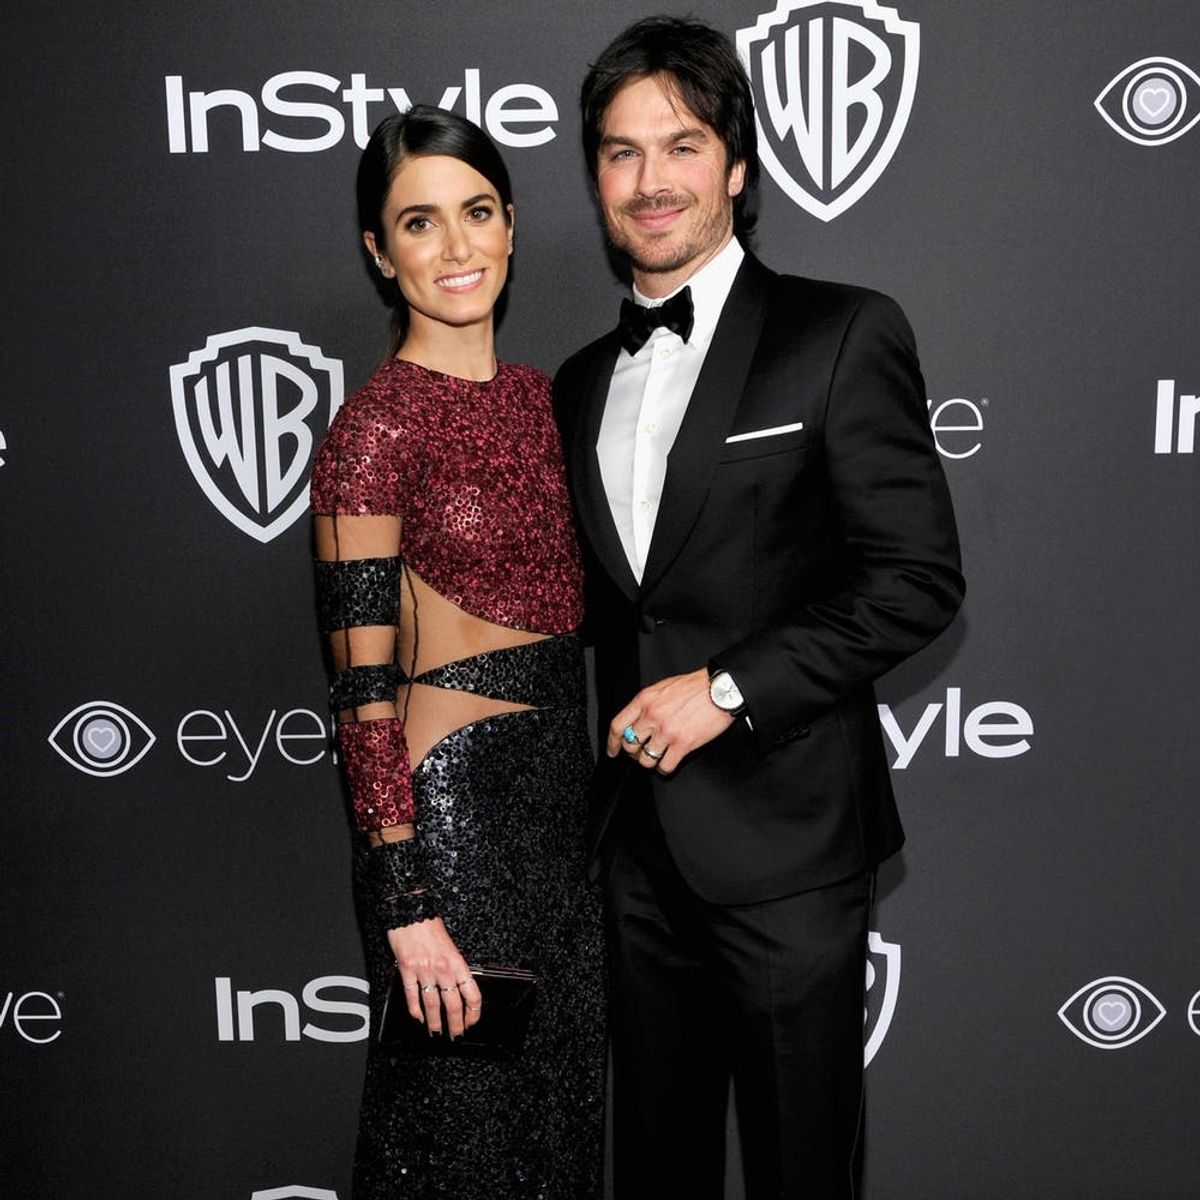 Ian Somerhalder’s Note to Nikki Reed About Motherhood Will Give You All the Feels